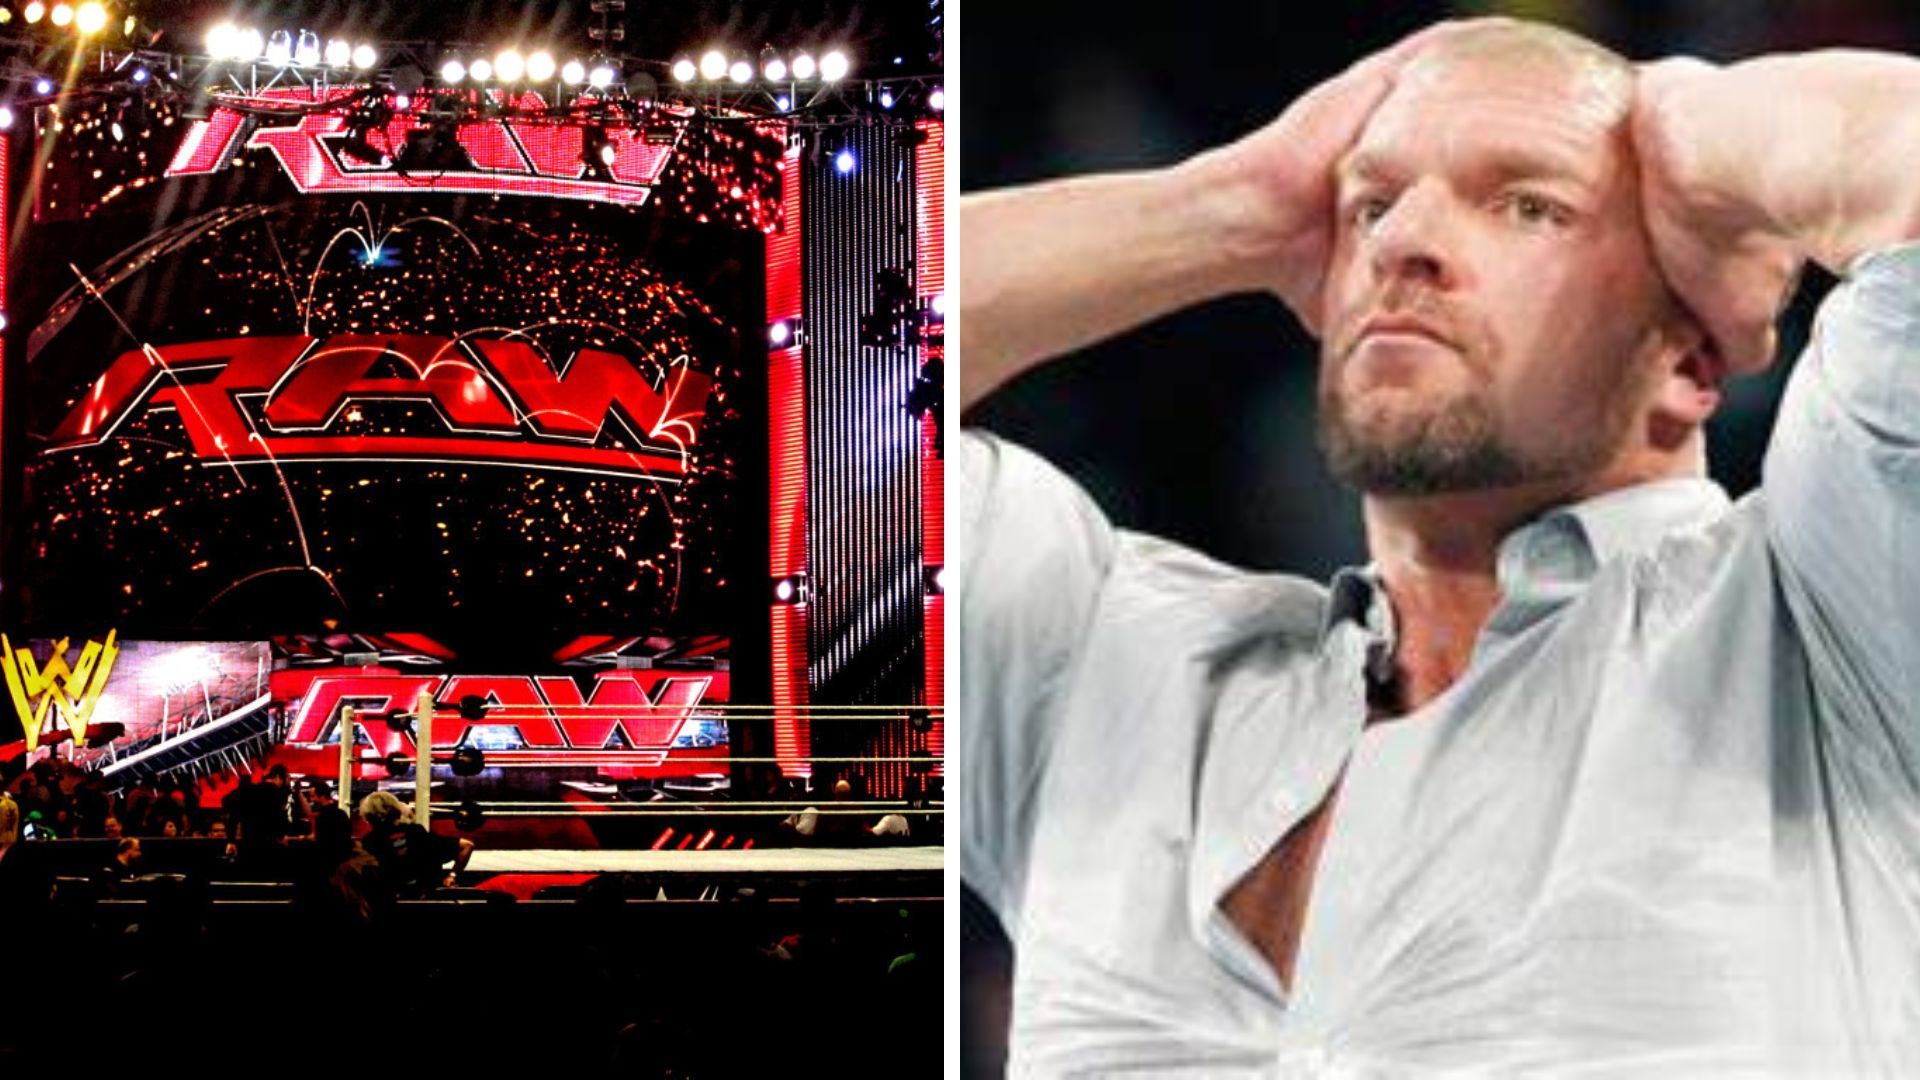 WWE RAW airs on Monday nights on the USA Network